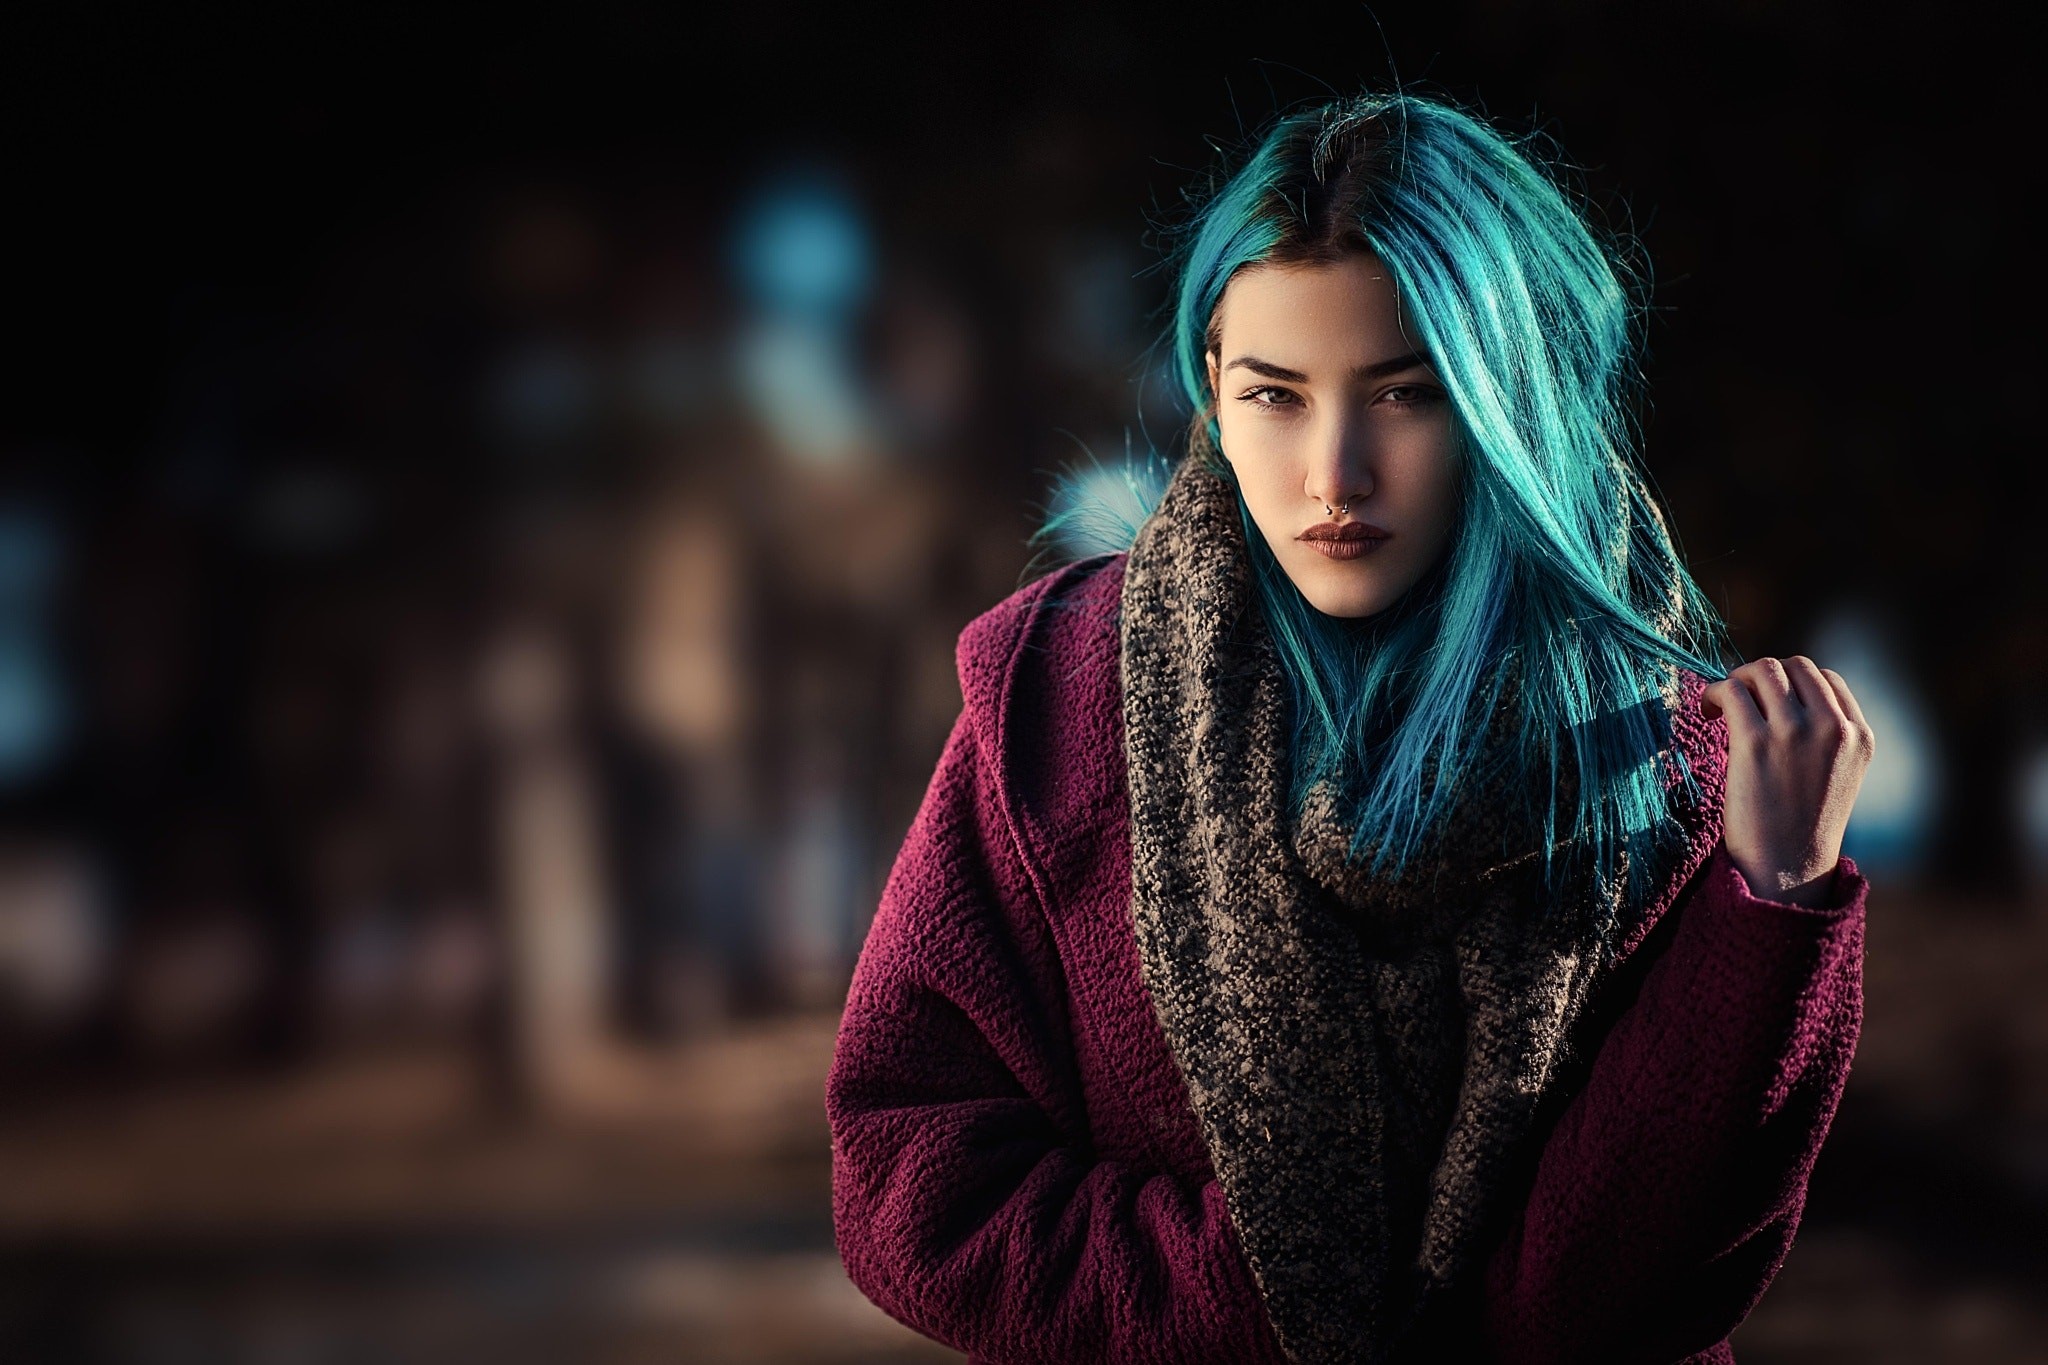 People 2048x1365 women portrait face dyed hair nose ring depth of field sweater scarf